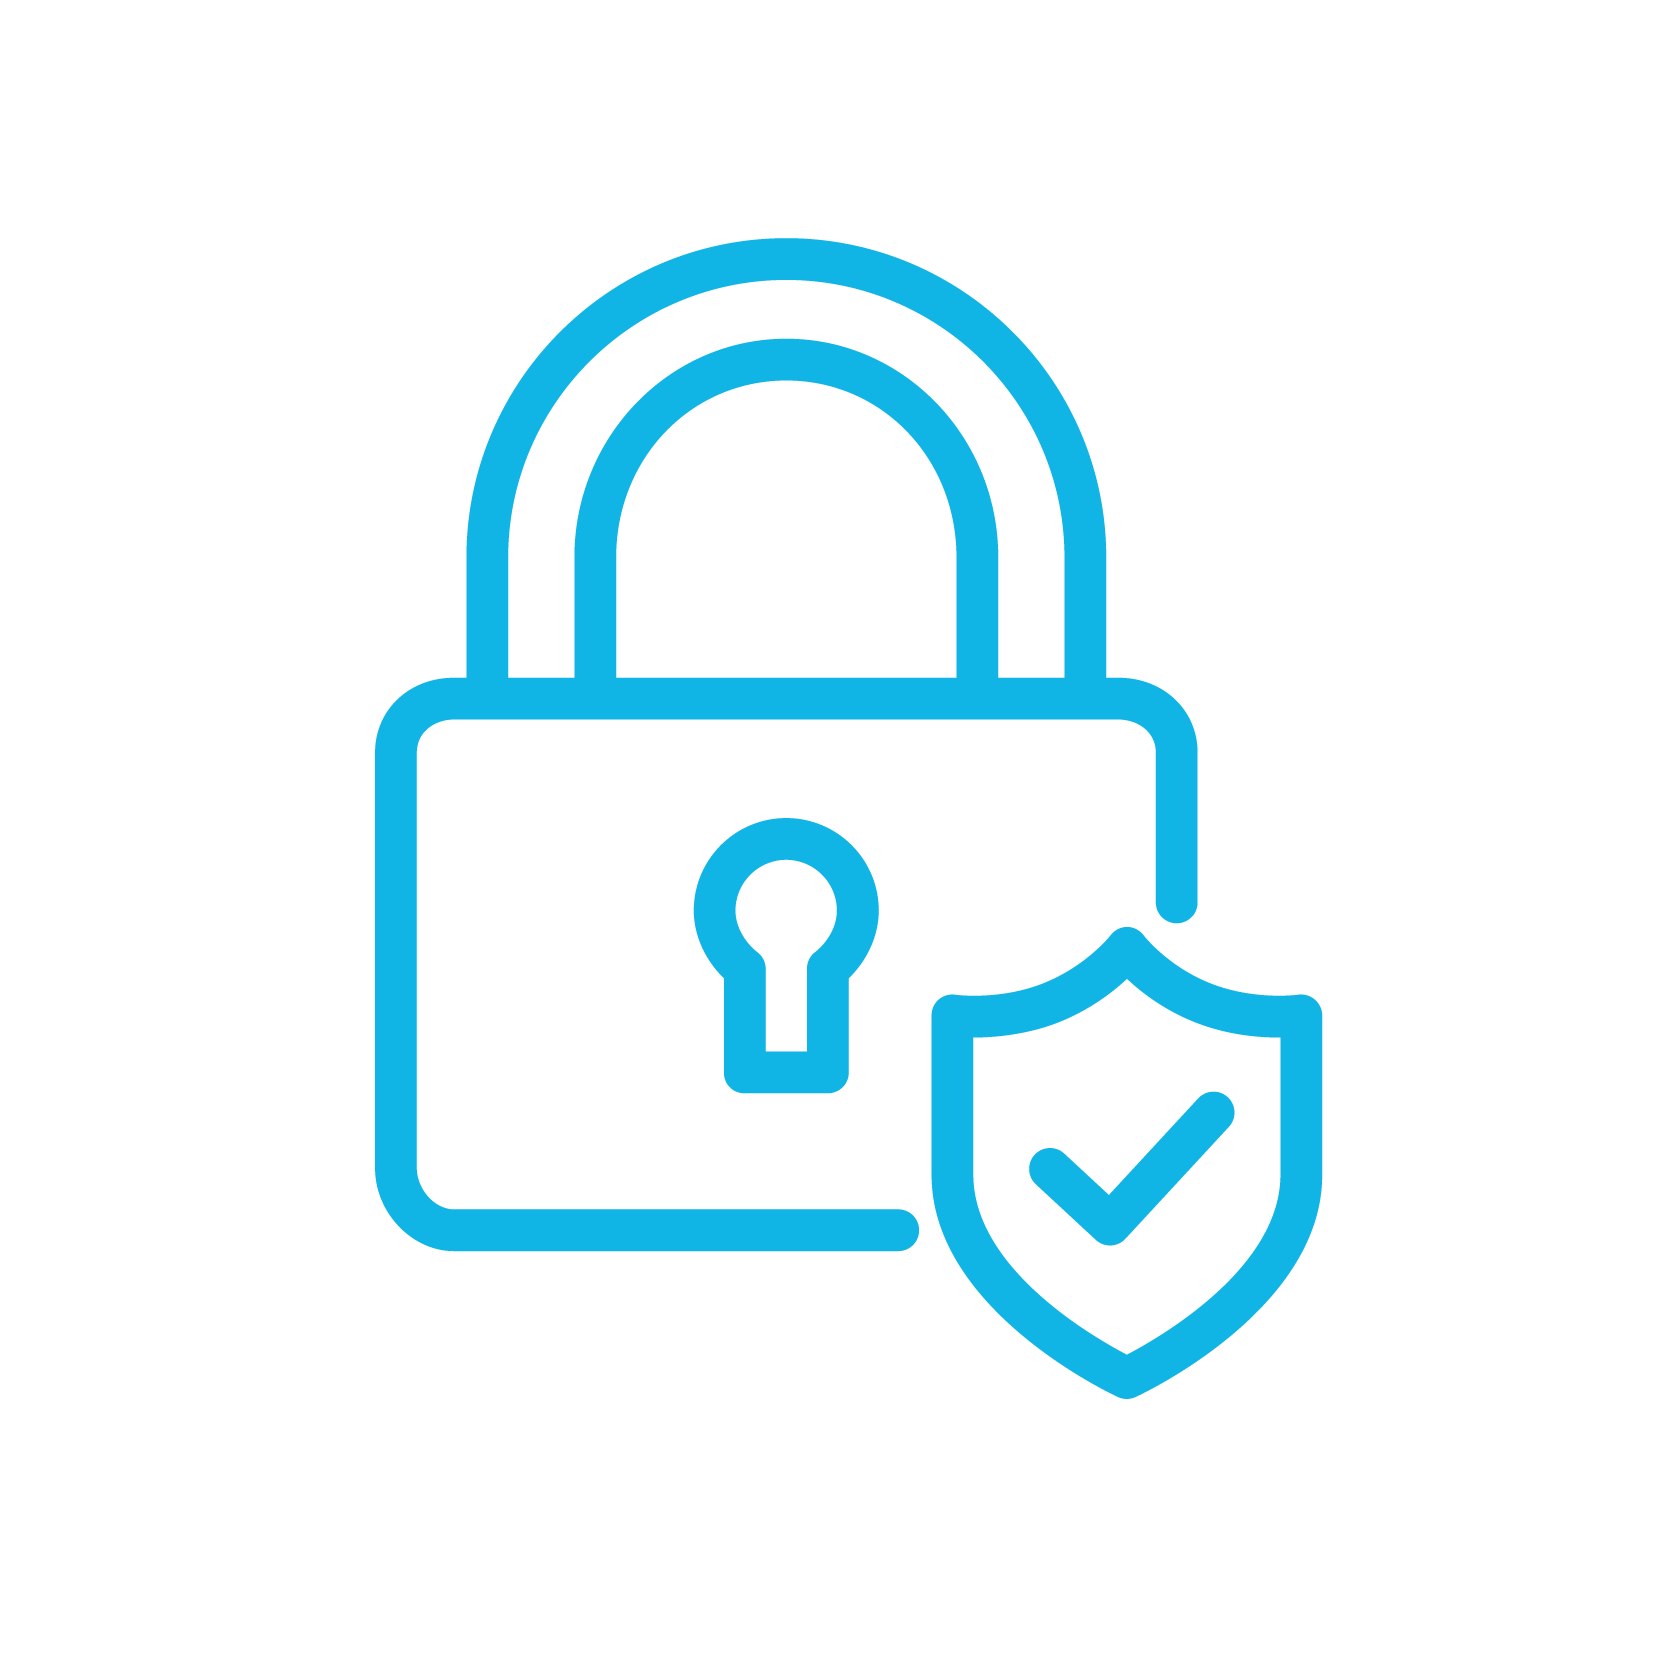 Advanced Security - This is an icon of a lock with a shield in front of it, and a check-mark on the shield.  This represents the advanced security of information on HammerTech's platform, which exceeds industry standards for data protection, compliance, performance and usability.